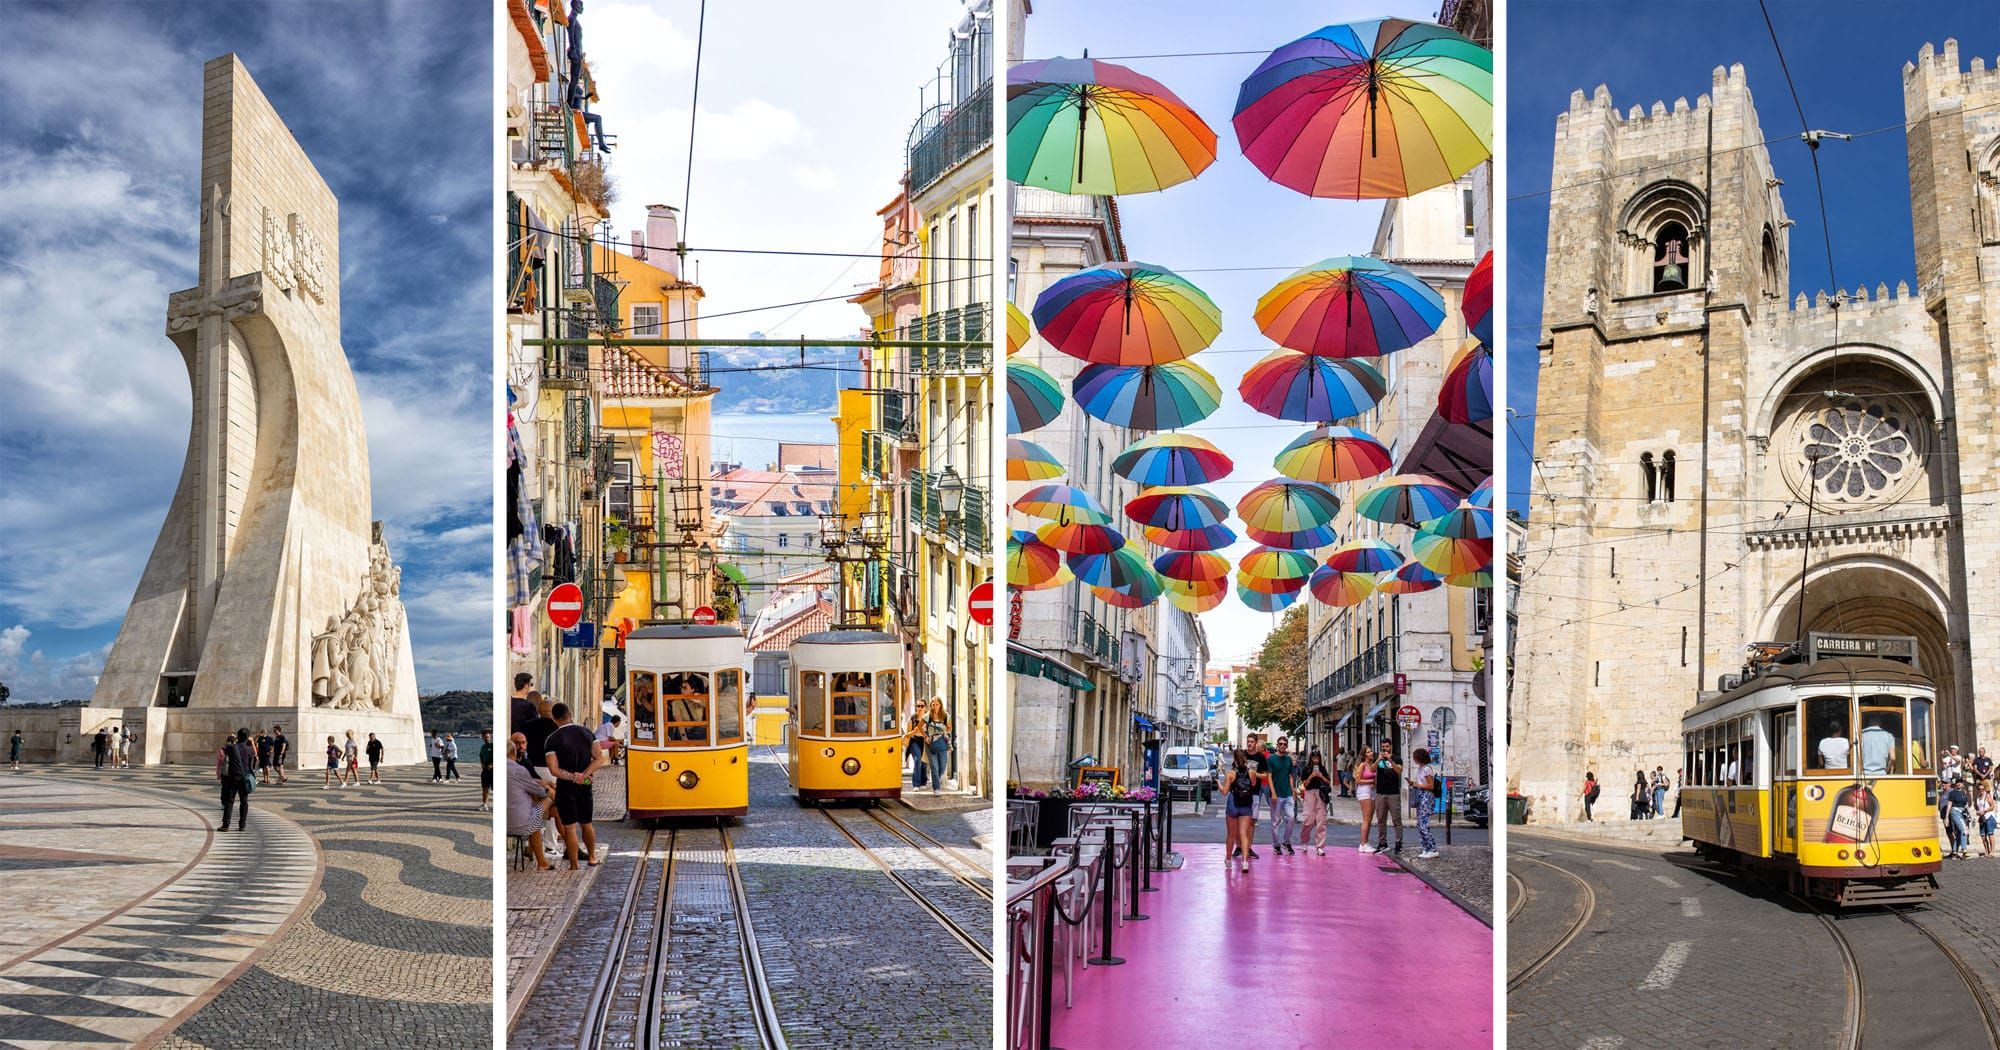 Featured image for “Lisbon Bucket List: 40 Amazing Things to Do in Lisbon”